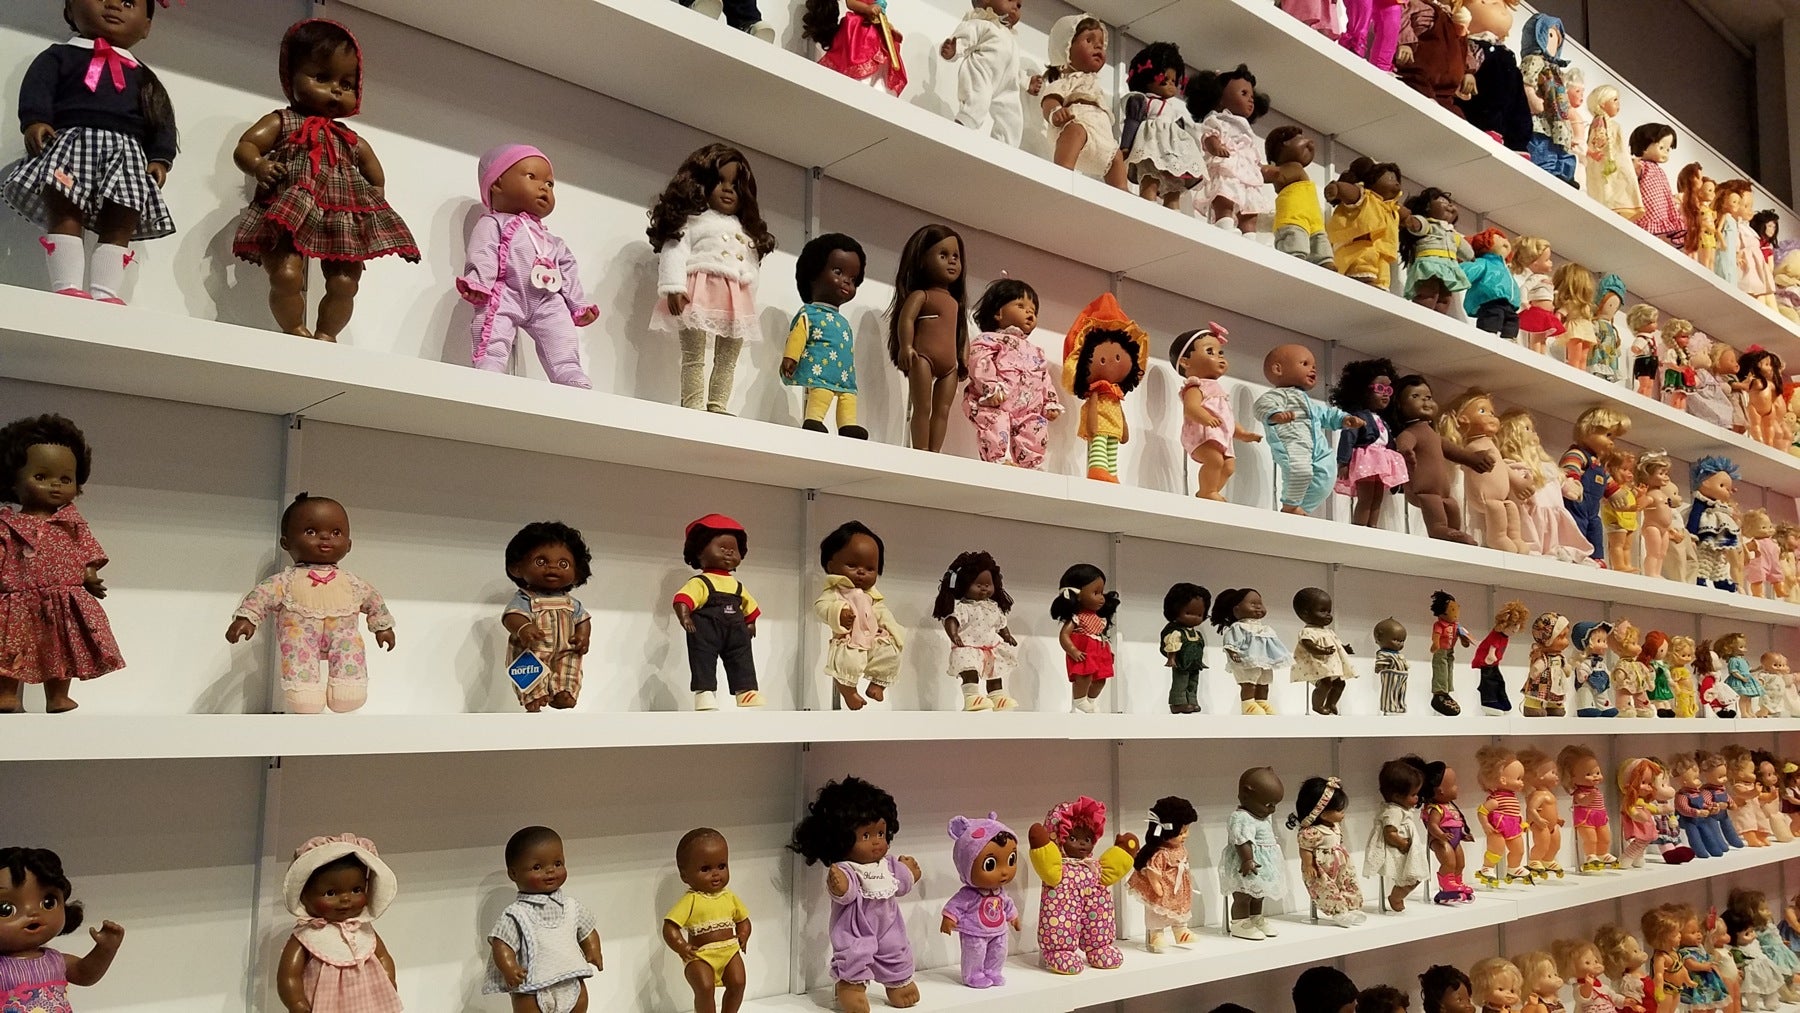 Whiteman’s dolls, on the left side of the wall, are all black. Hancock’s on the right are all white. 